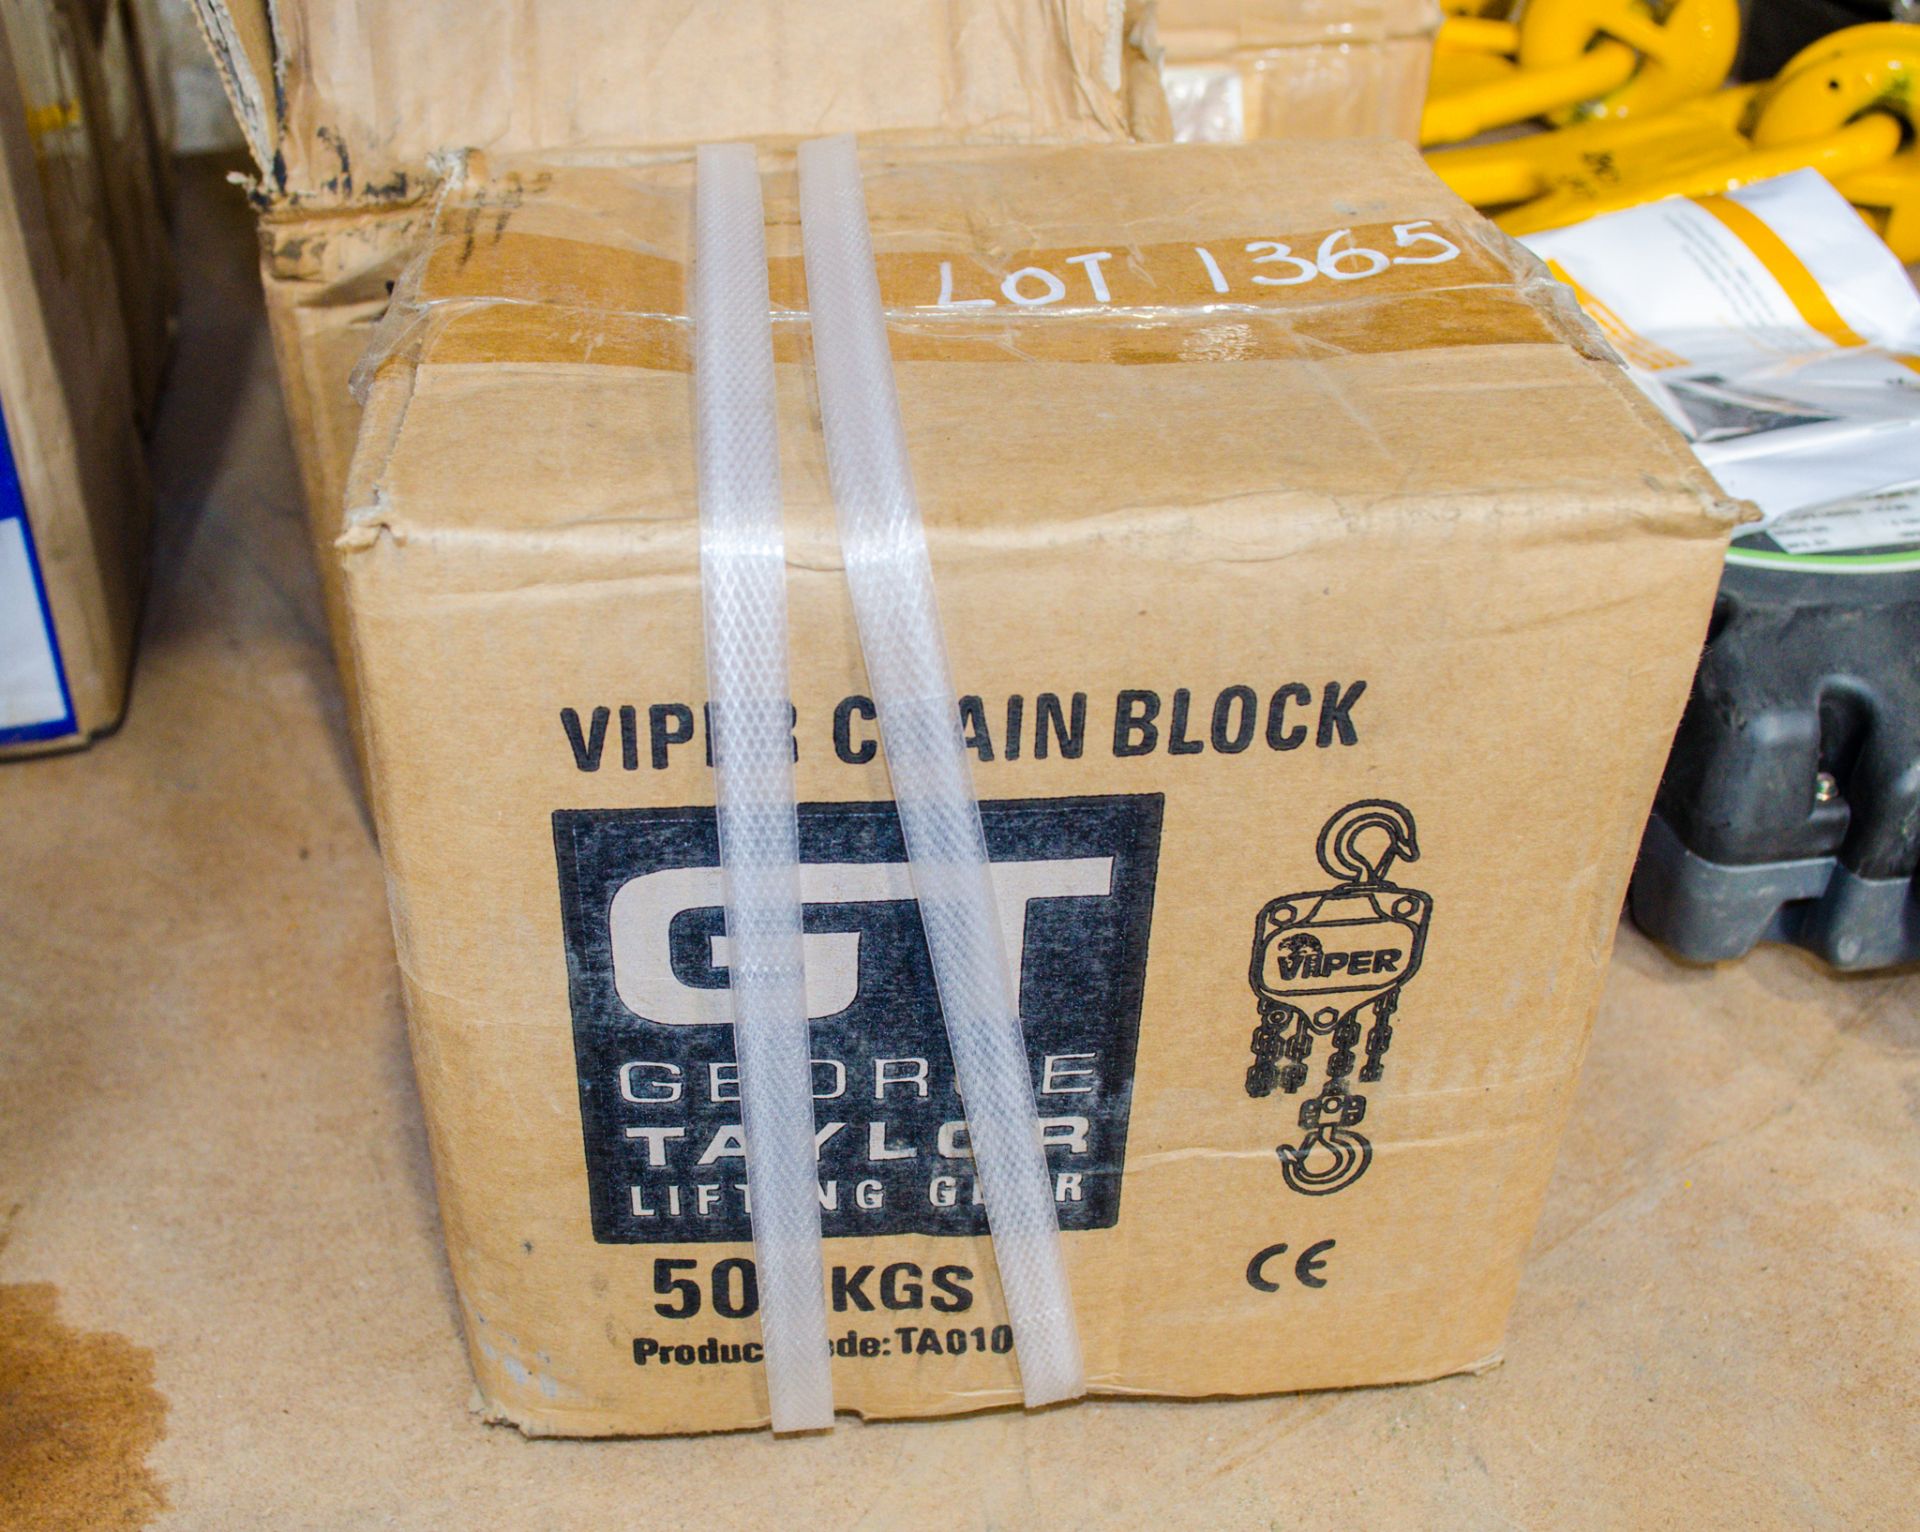 GT Viper 0.5 tonne chain block ** New and unused ** - Image 2 of 2